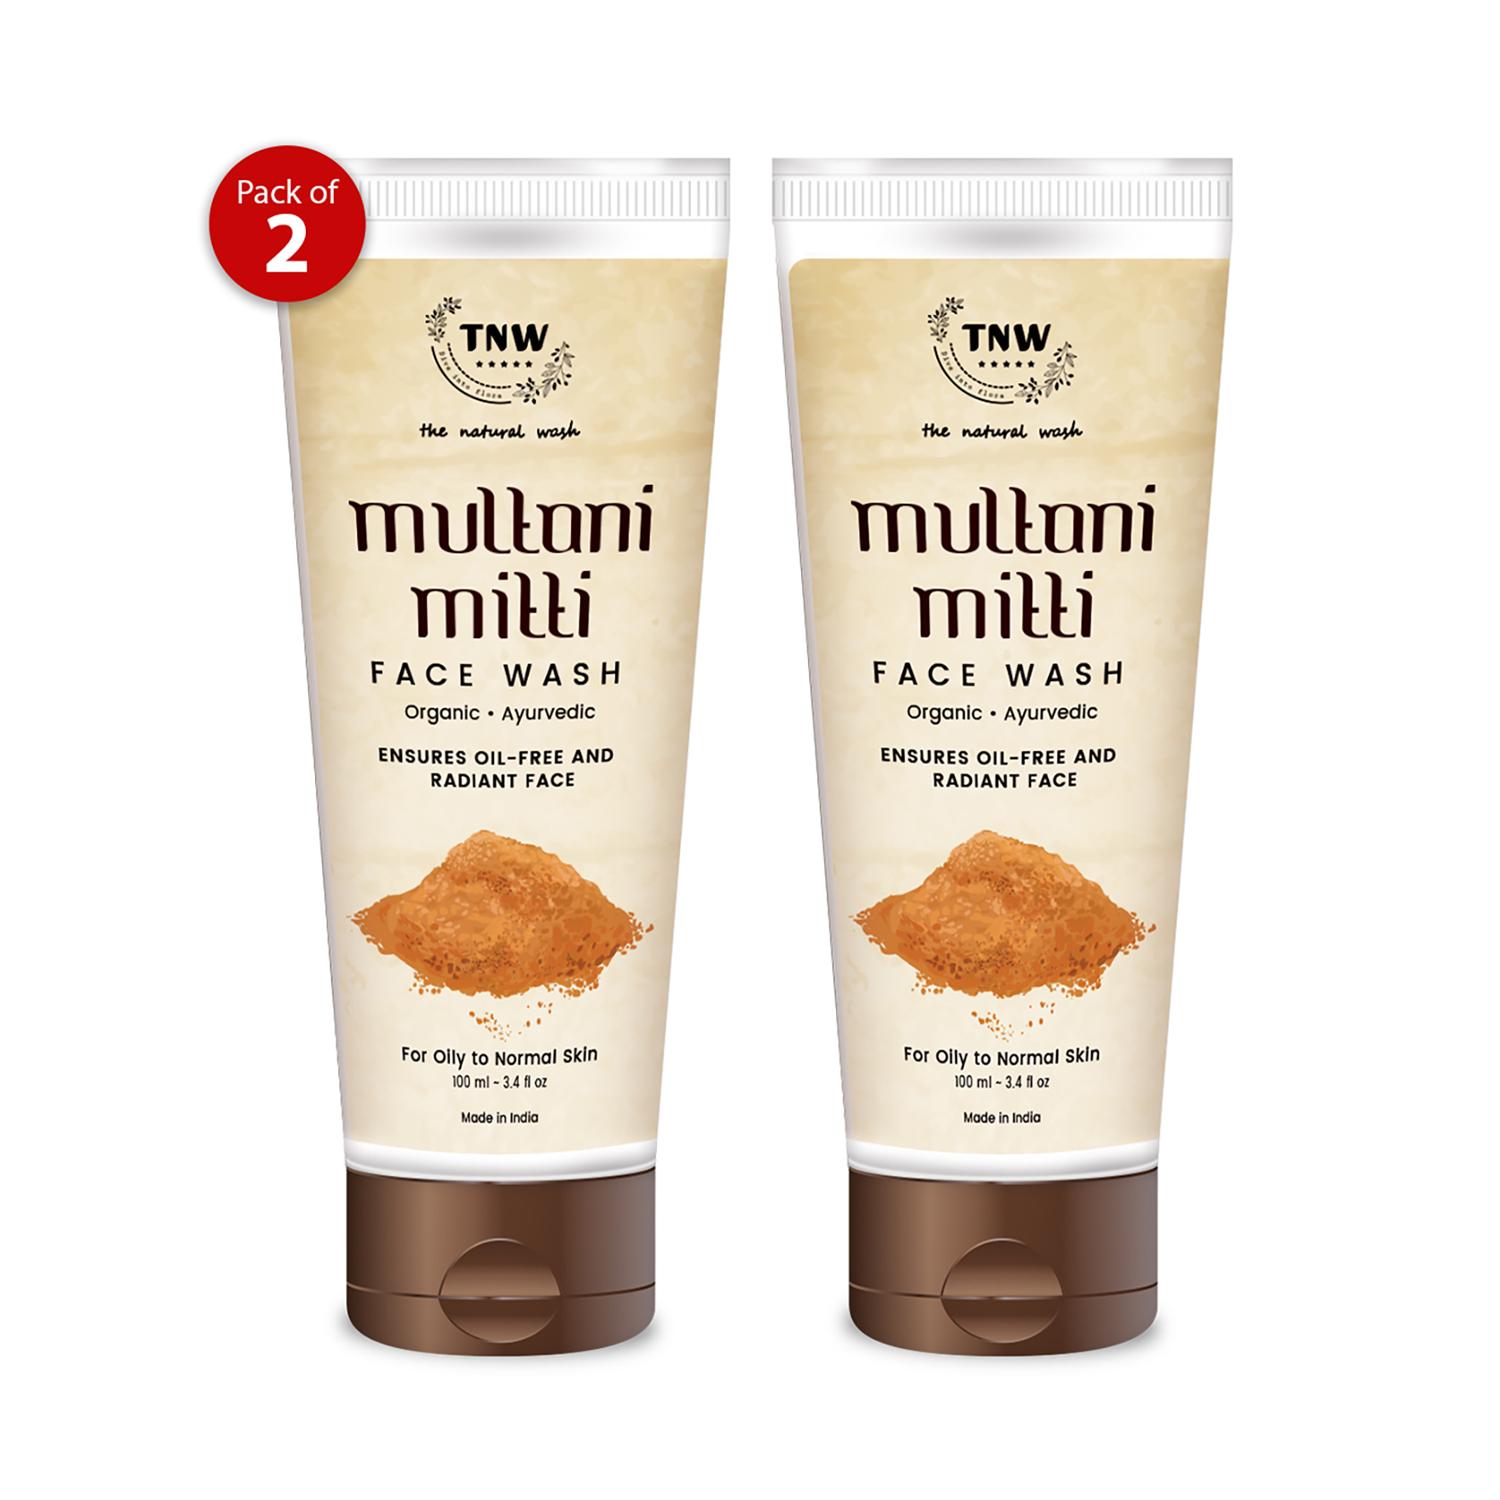 TNW The Natural Wash | TNW - The Natural Wash Multani Mitti Face Wash Pack of 2 Combo